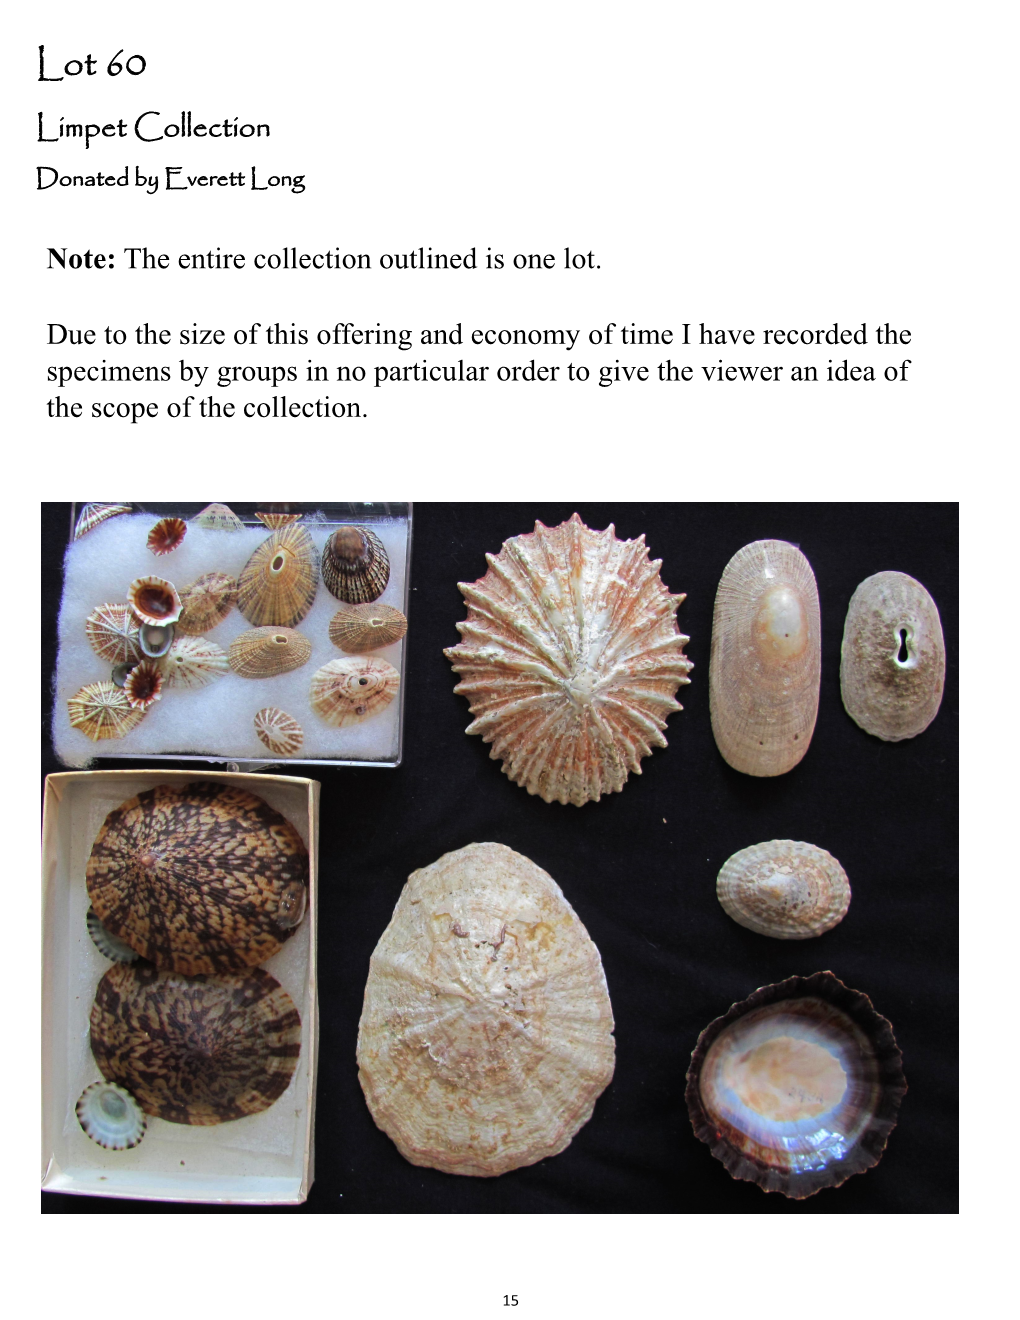 Lot 60 Limpet Collection Donated by Everett Long